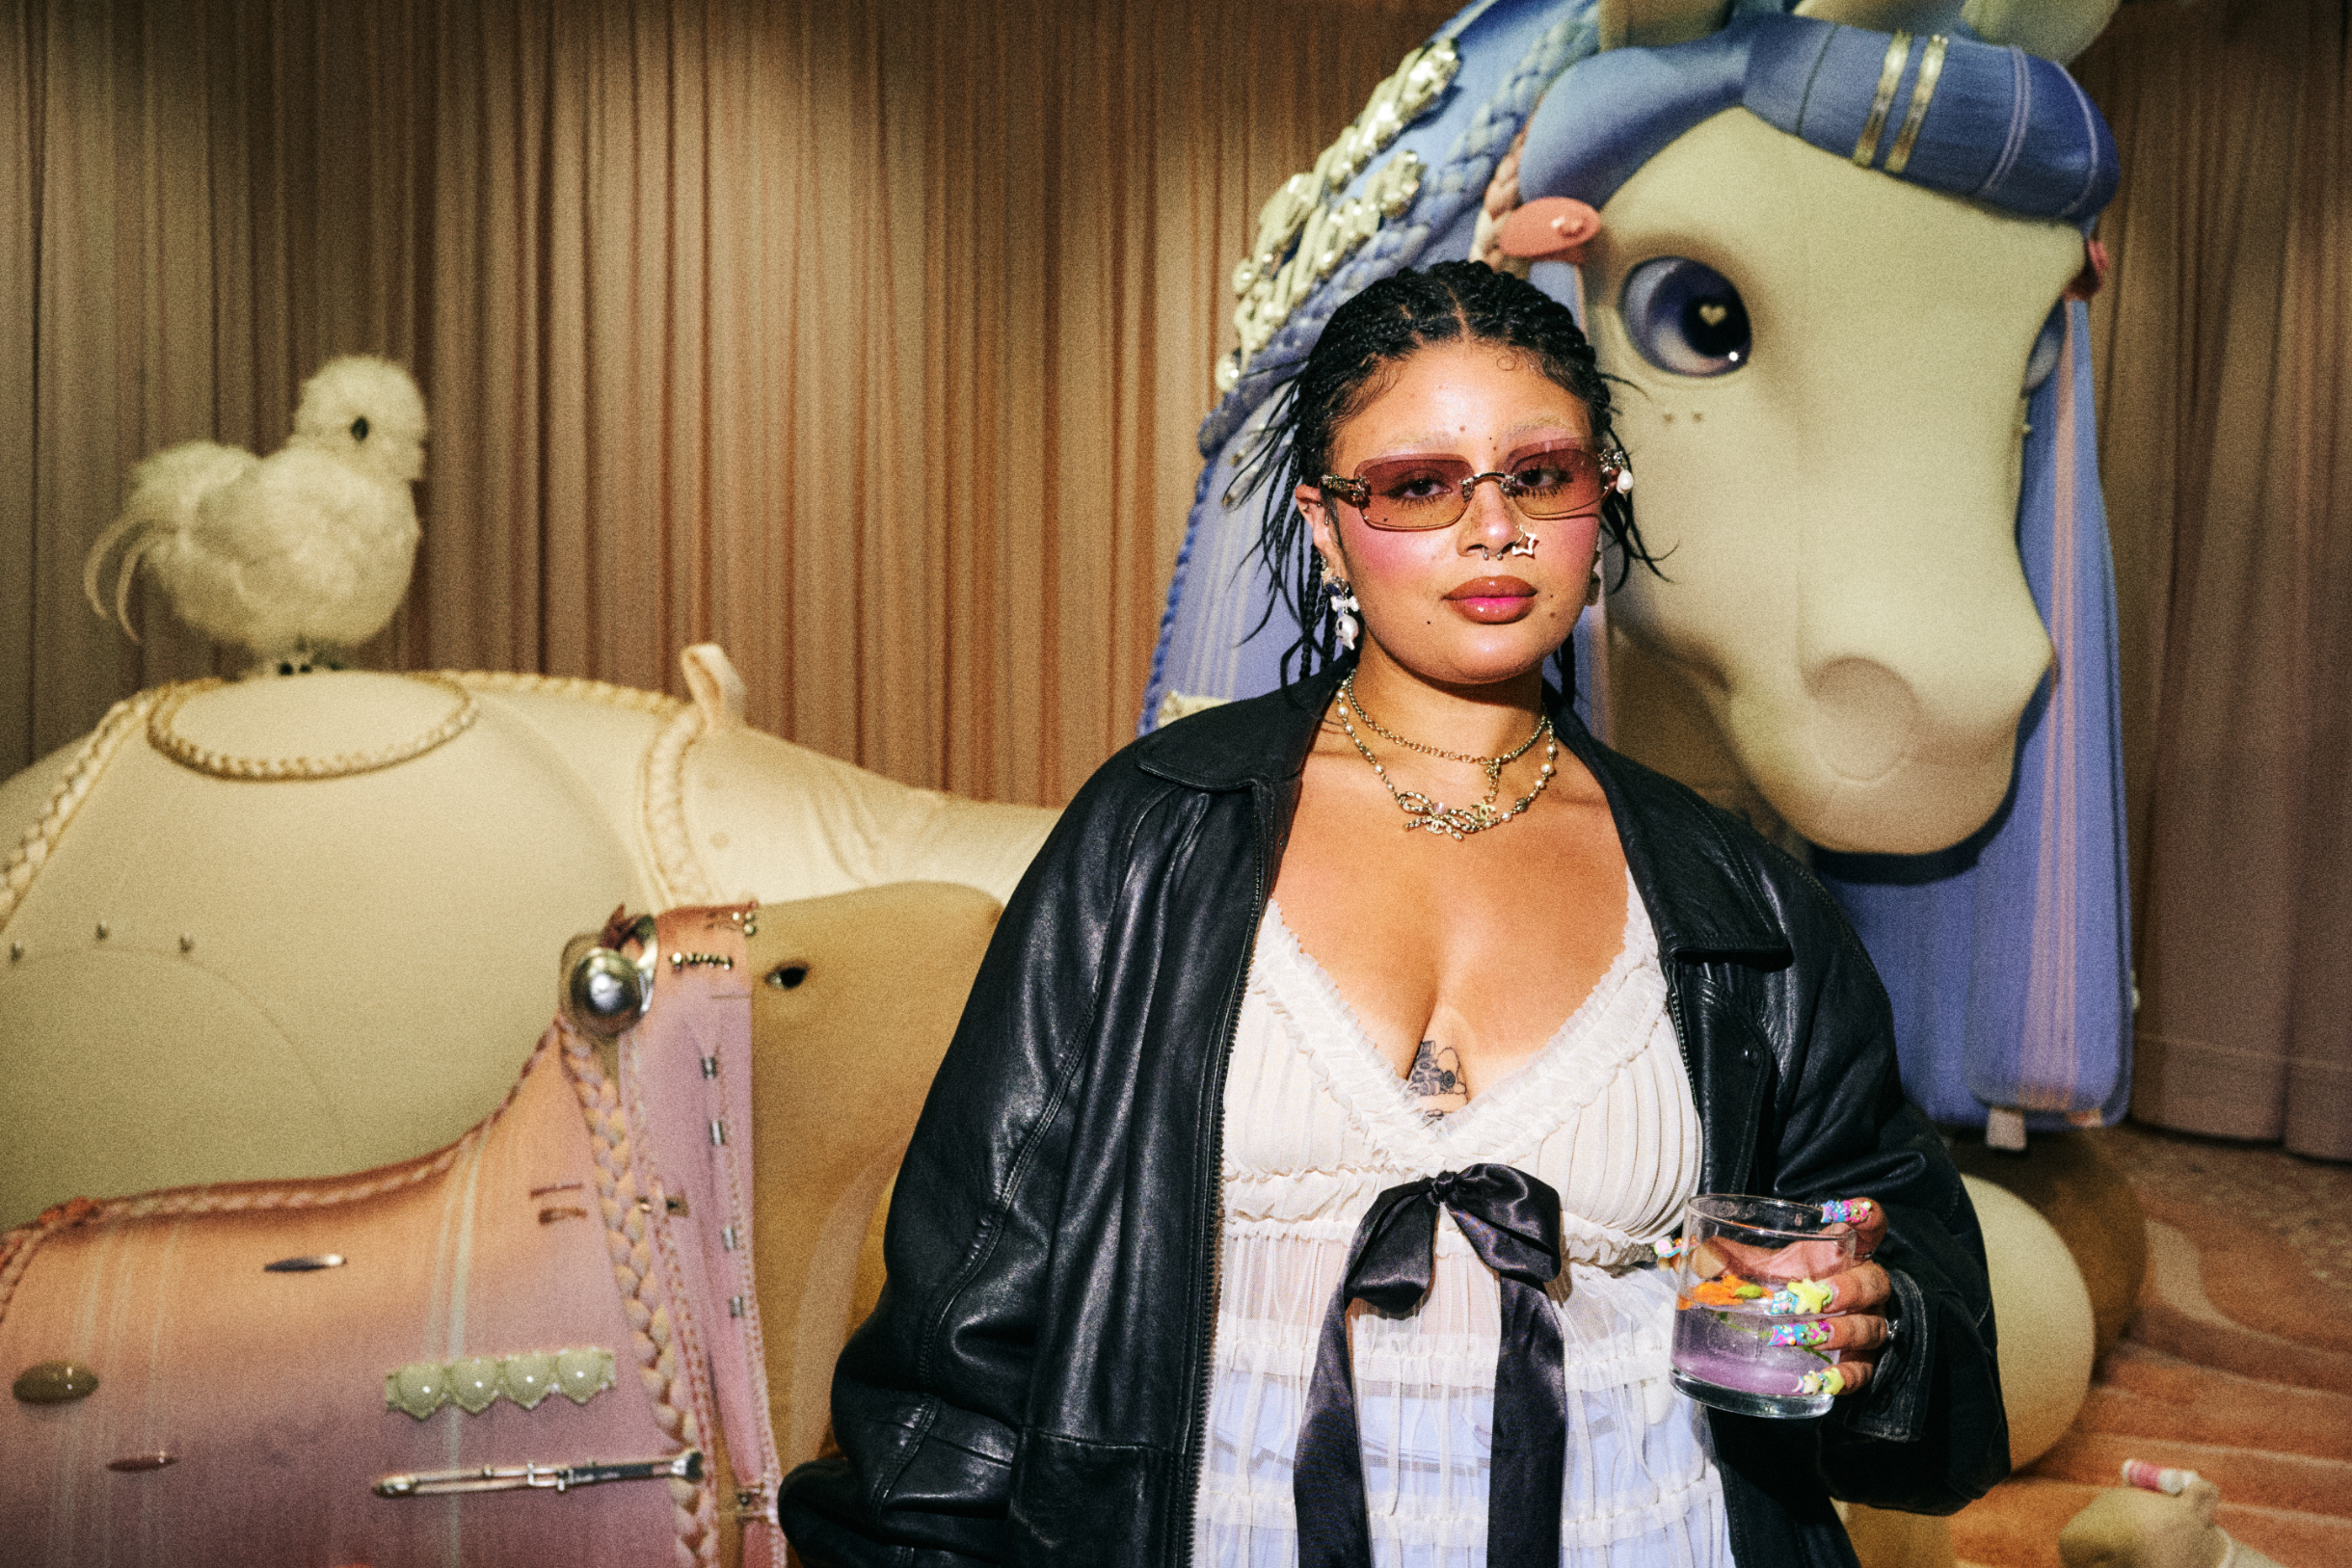 Woman in white corset top and black jacket at event, standing near large toy horse